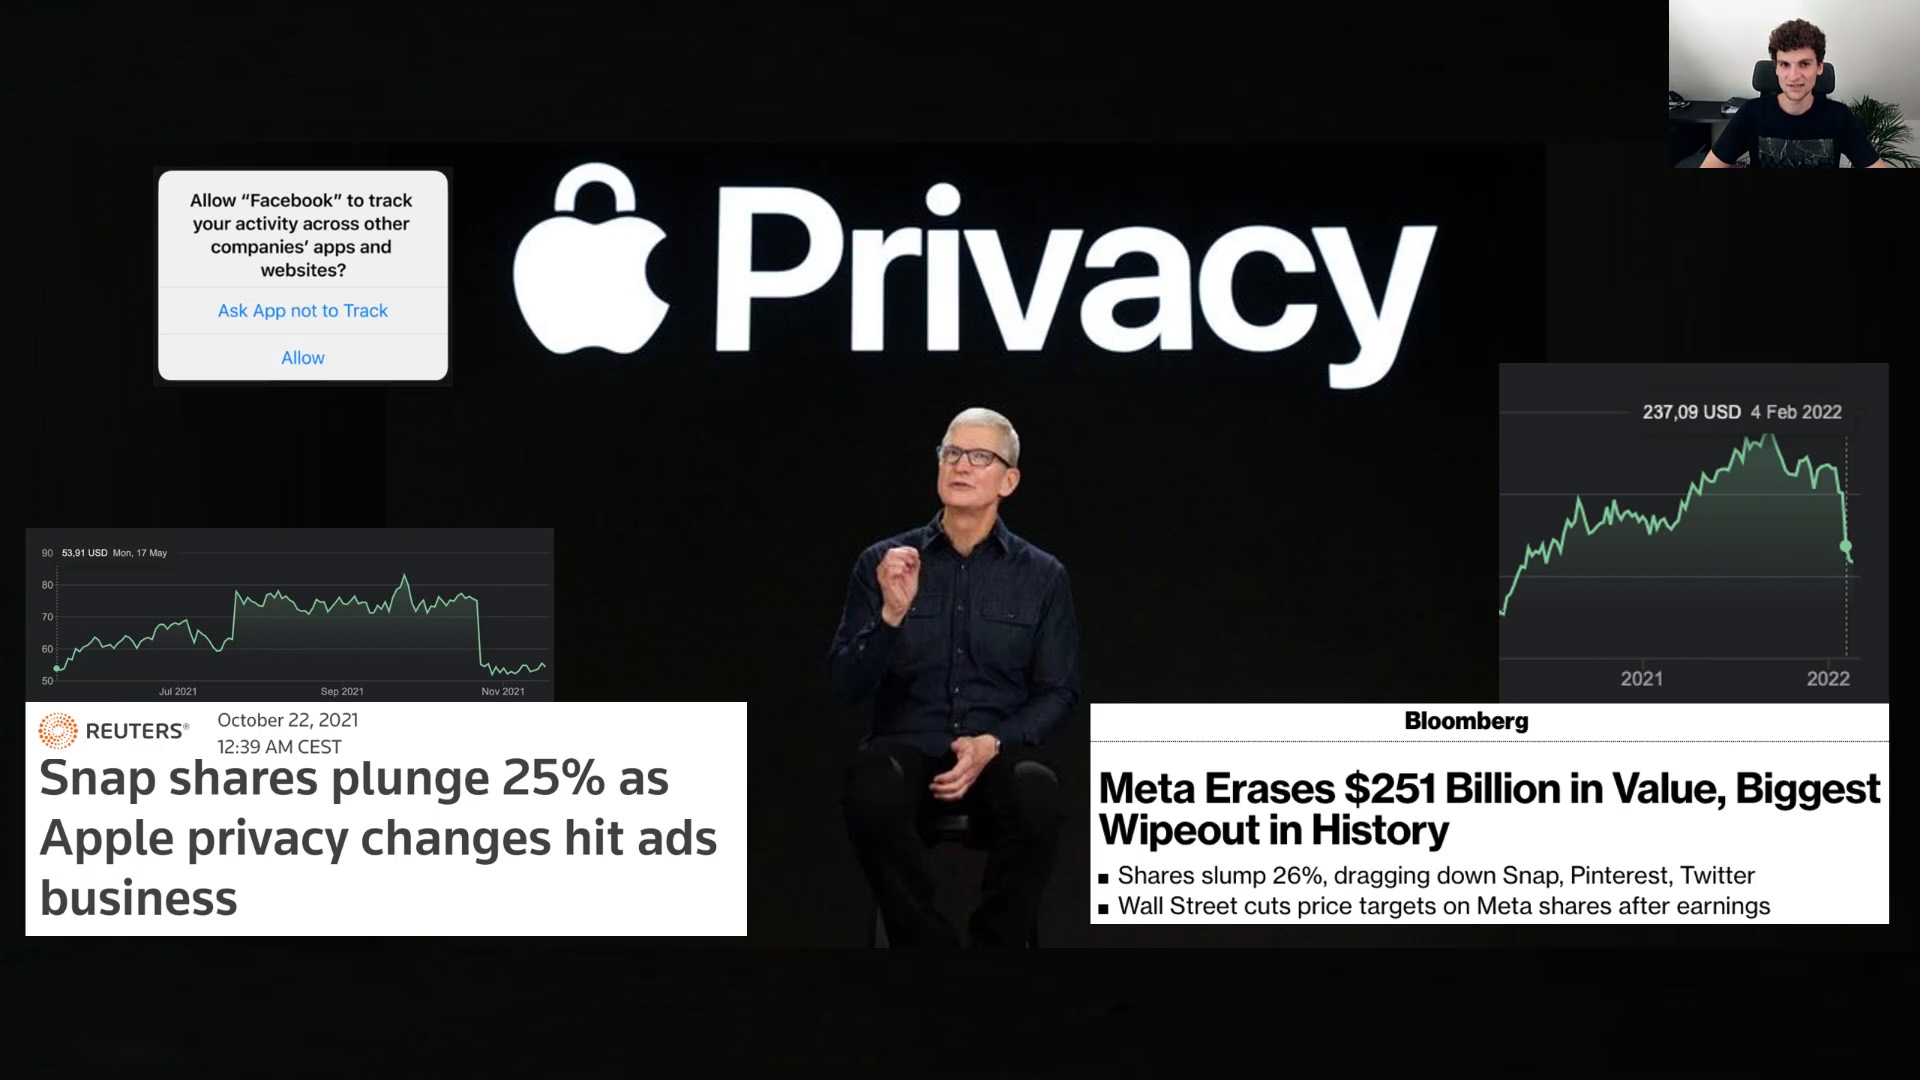 "Privacy" Update by Apple 2021